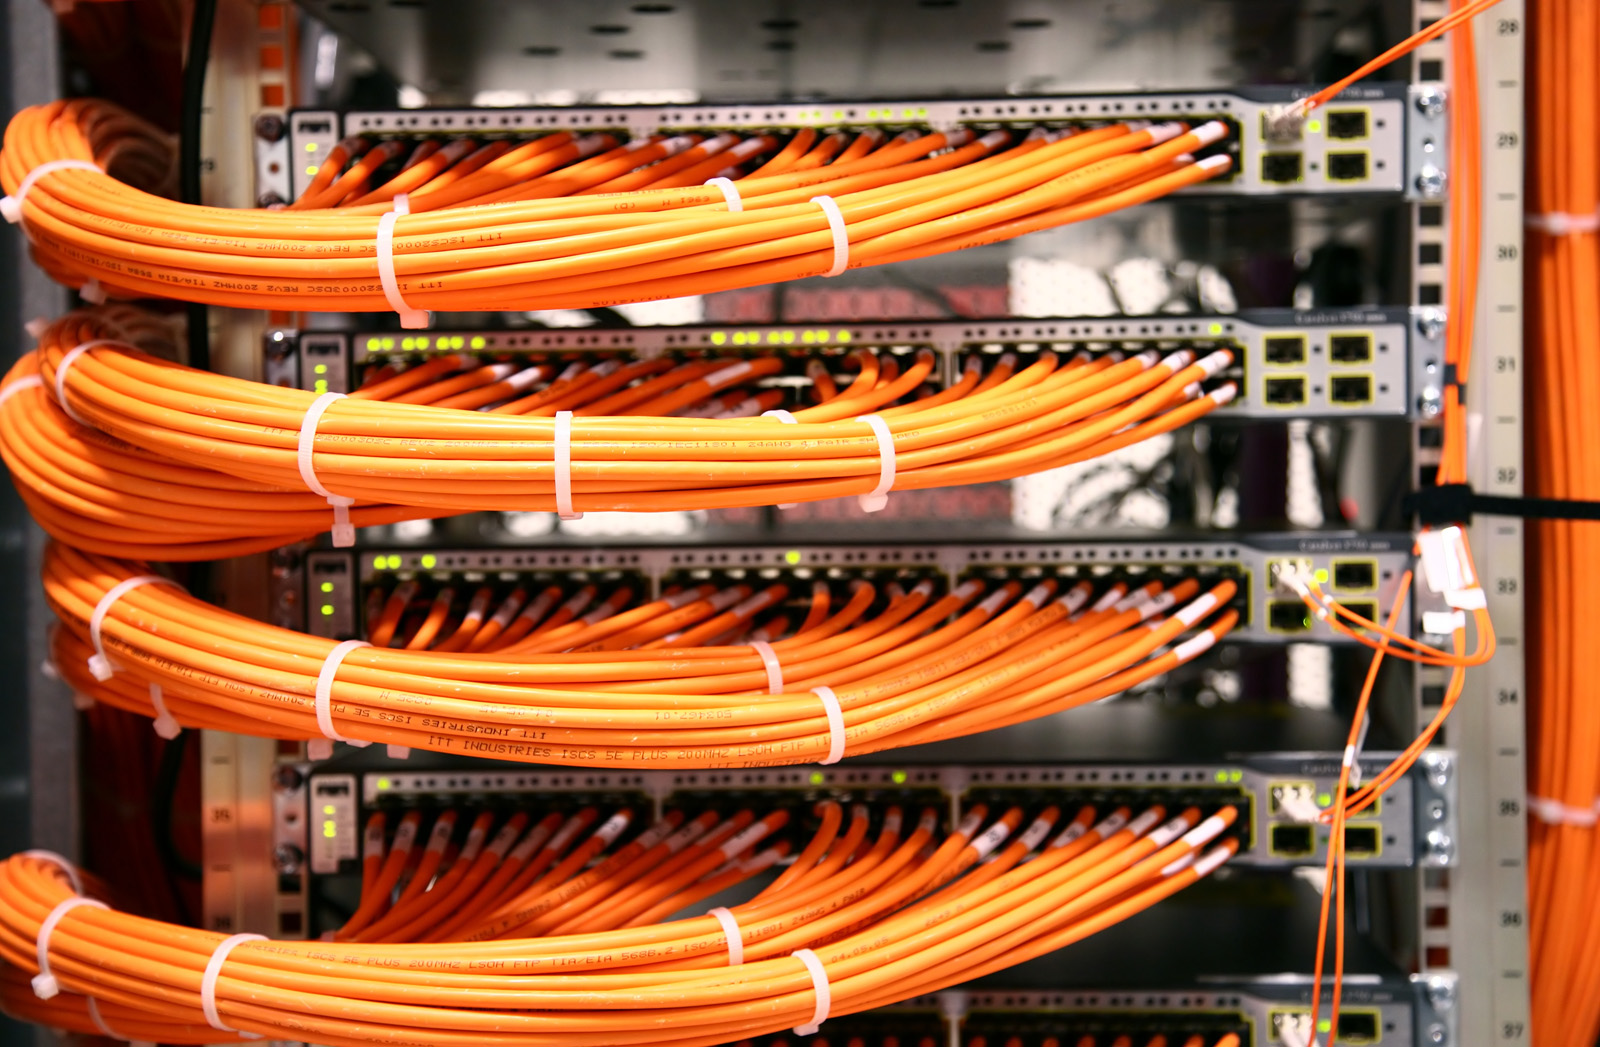 Taylorsville Kentucky Superior Voice & Data Network Cabling Contractor